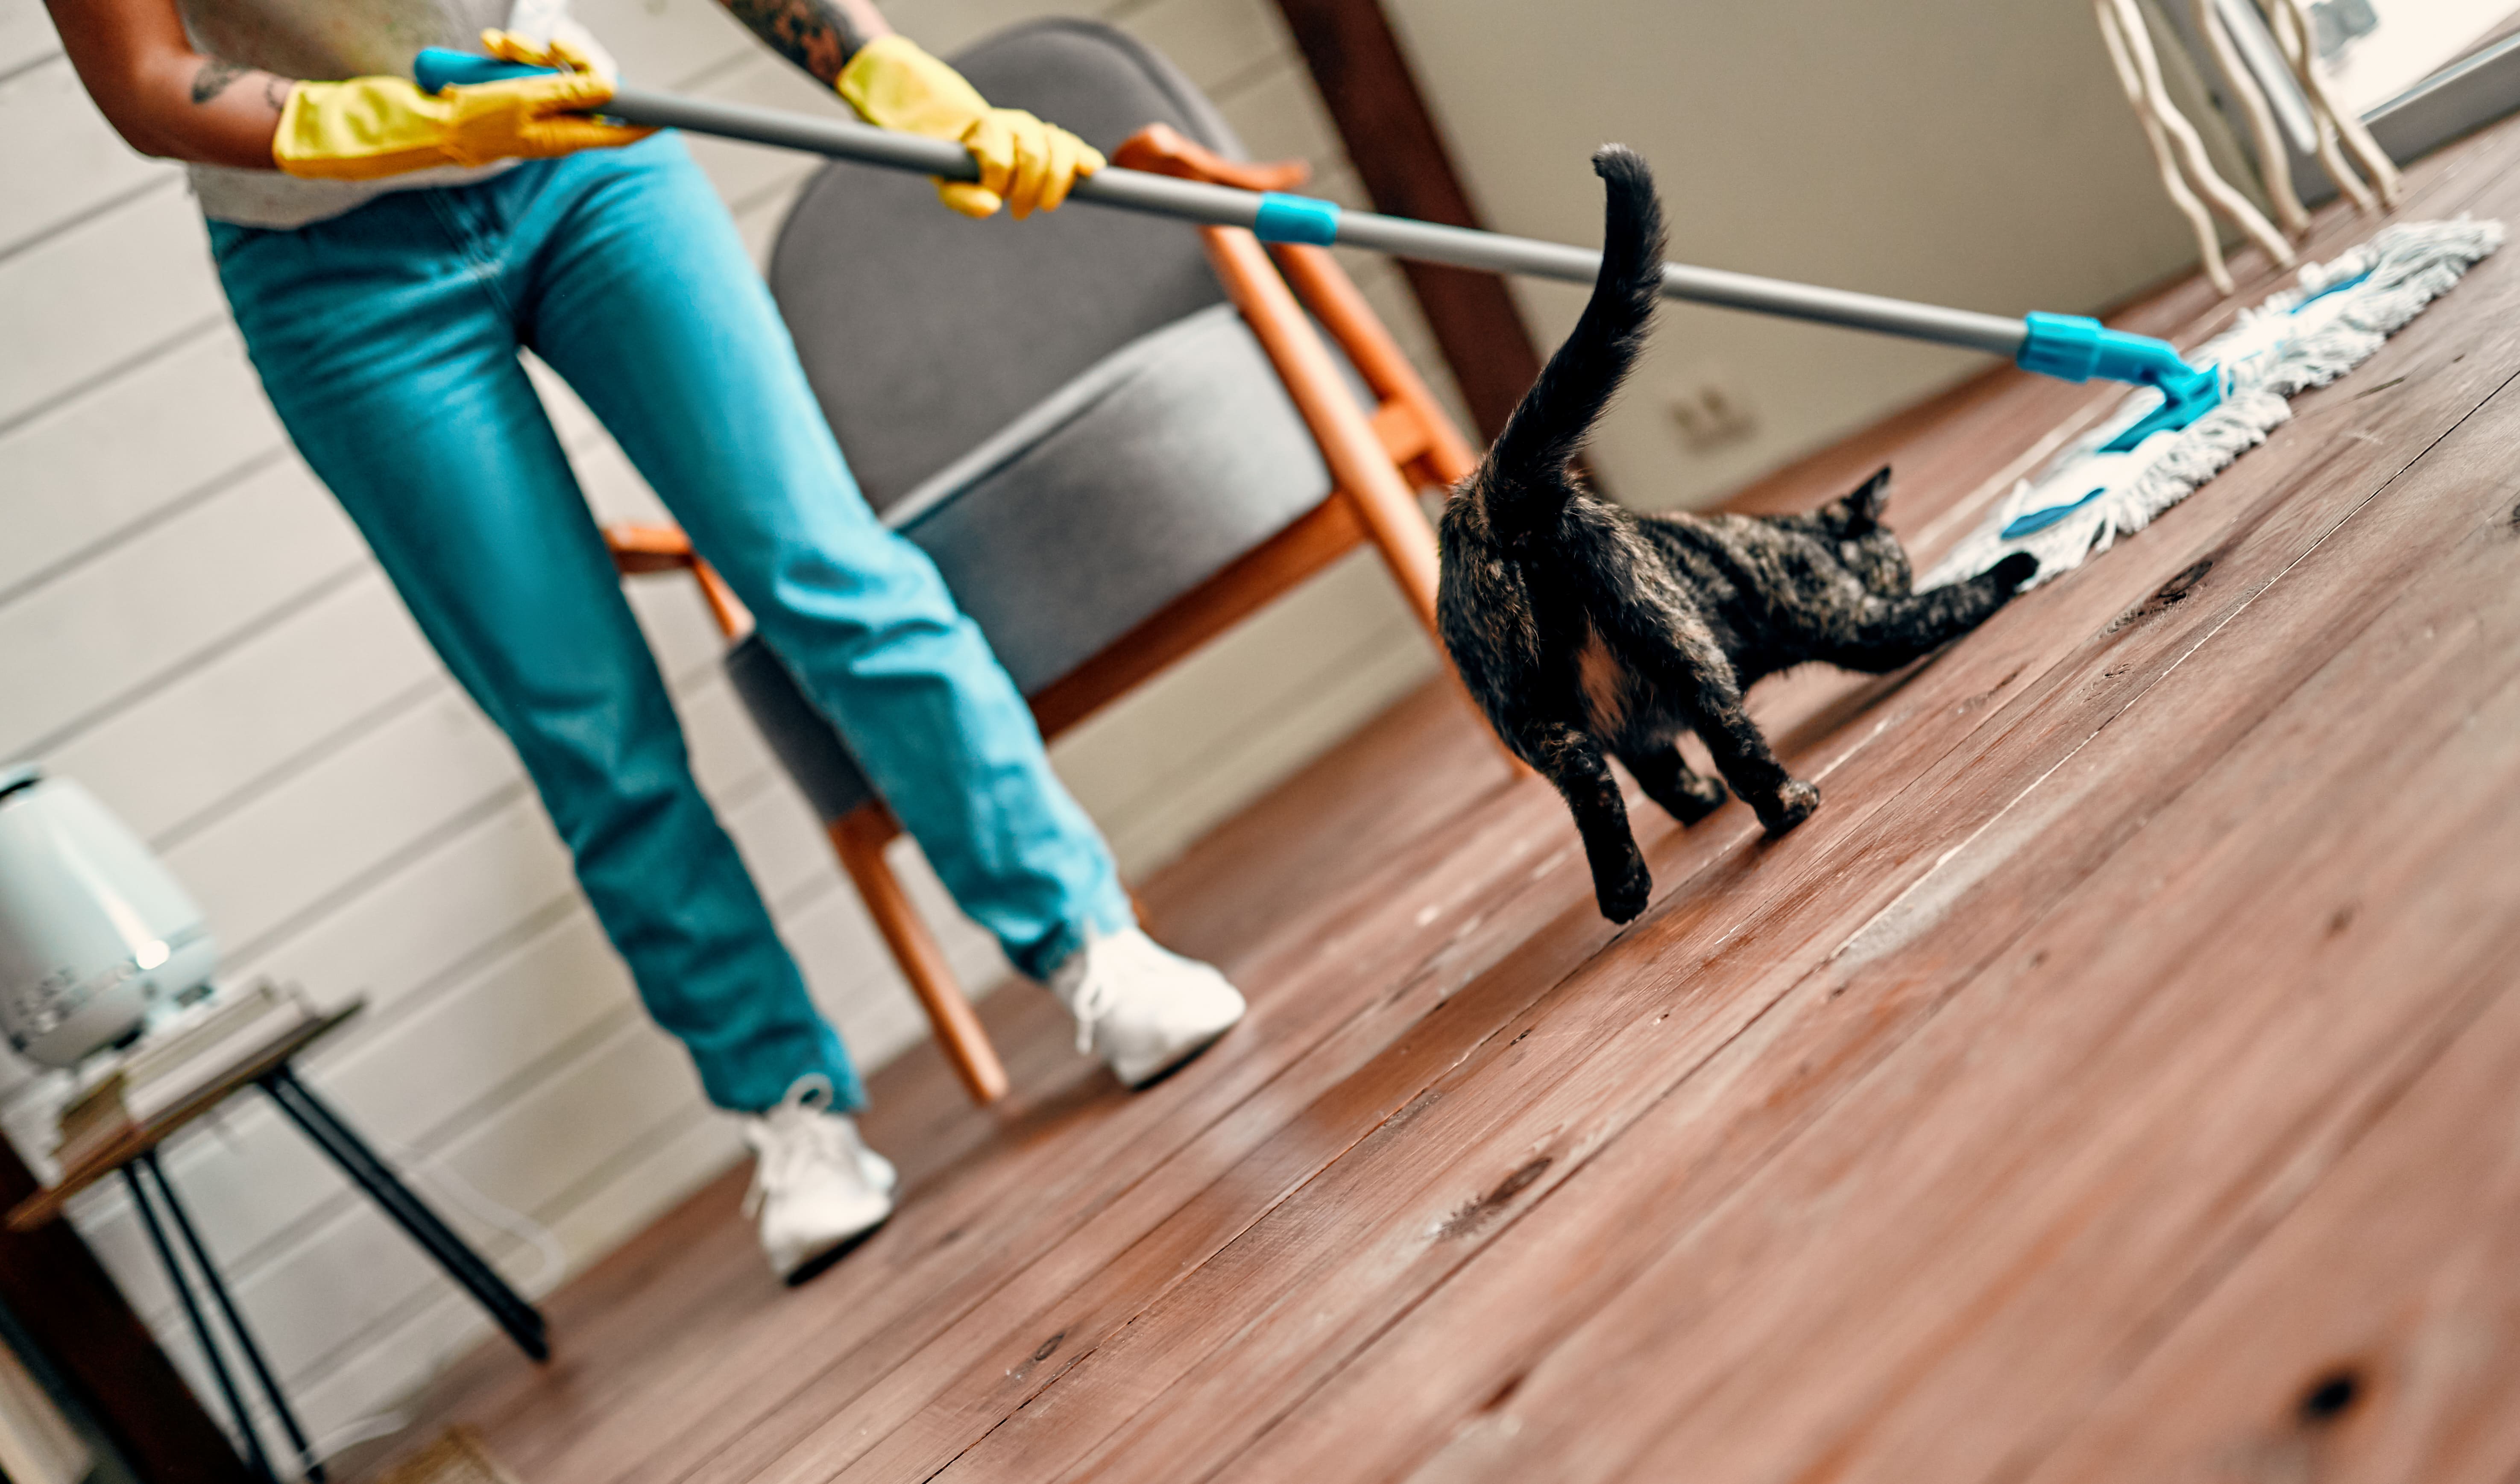 a person sweeping the floor while a black cat plays around her legs